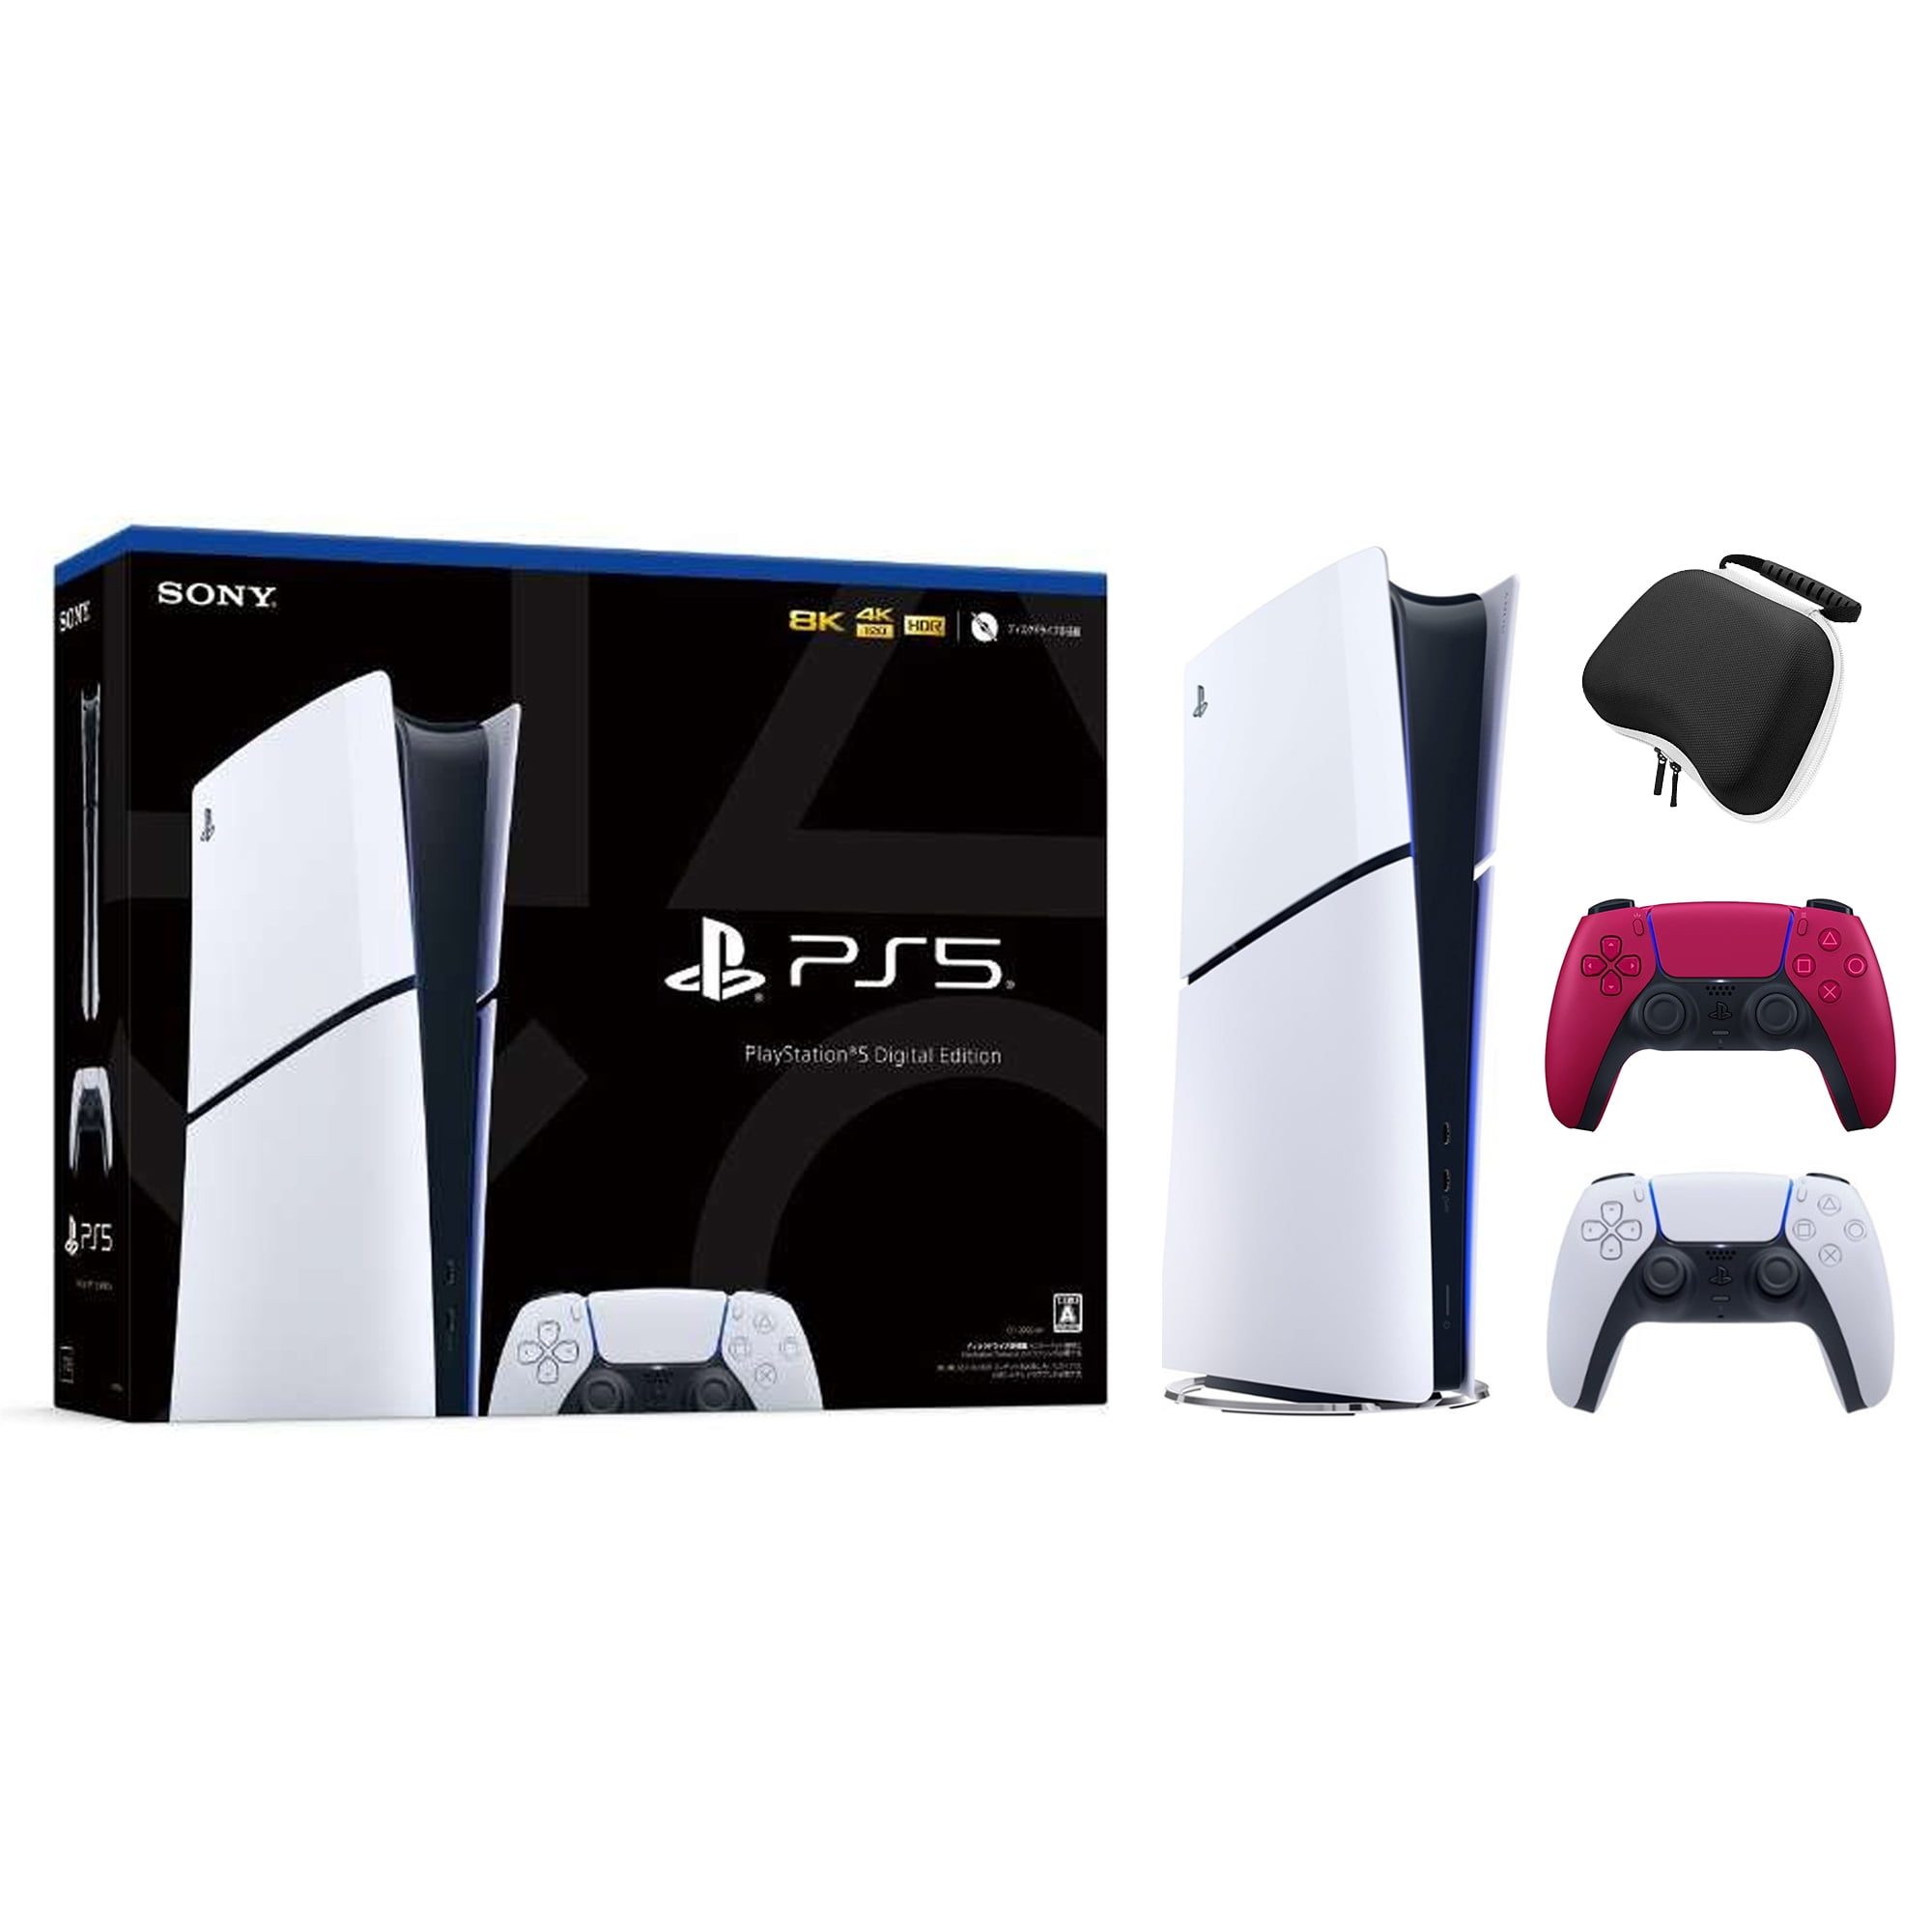 PlayStation 5 Slim, PS5 Console, Built-in 1TB SSD Storage Bundle 